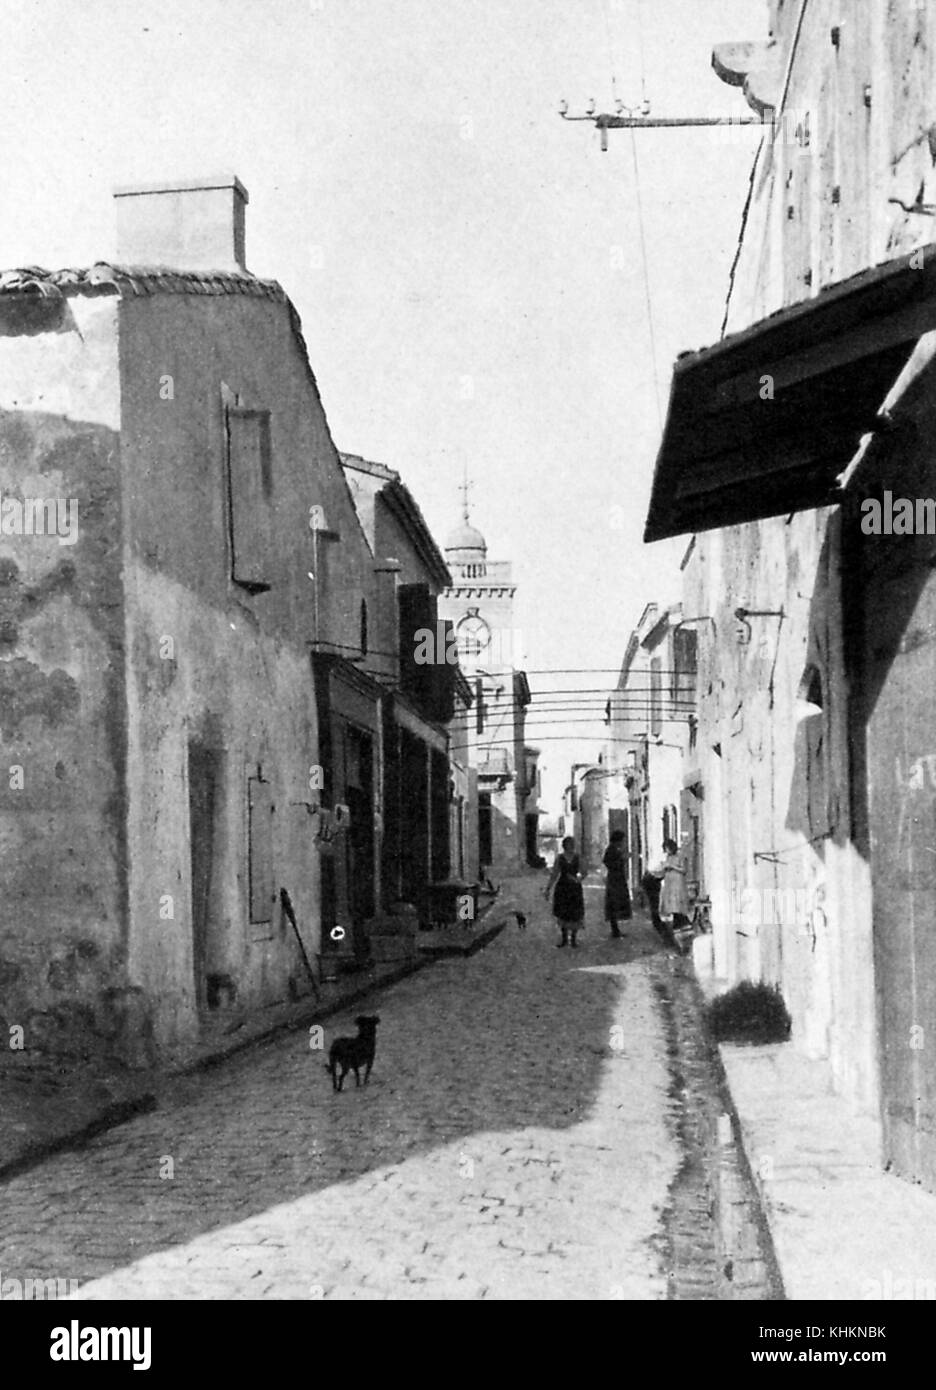 A photograph depicting a typical street in Les Saintes Maries de la Mer, which is the capital city of the region, the narrow granite paved street is lined by short, modest stone houses that are densely packed, roofs made of tiles can be seen on tops of the houses, women are shown walking and talking in the street, a stray dog stands watching them, Les Saintes Maries de la Mer, Camargue, France, July, 1922. Stock Photo